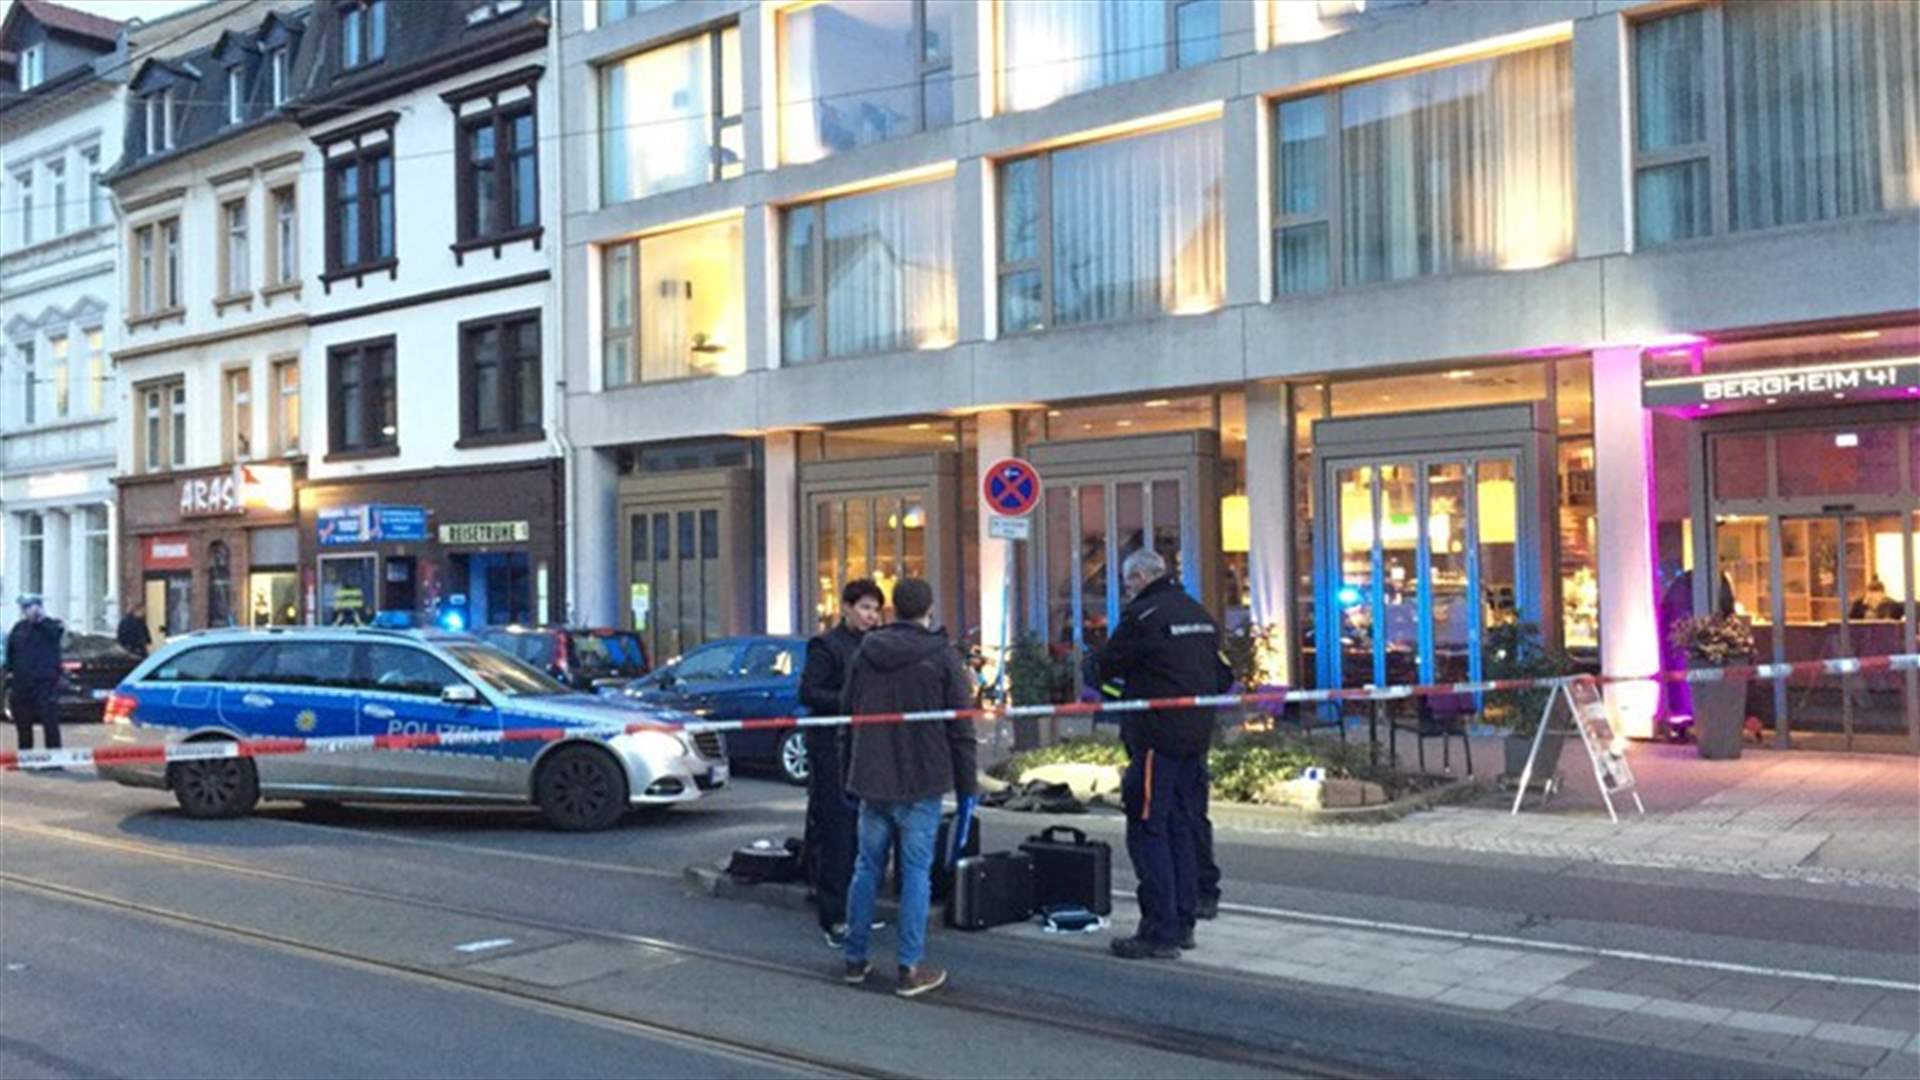 [VIDEO] Man drove into crowd in German town, injuring three people-police